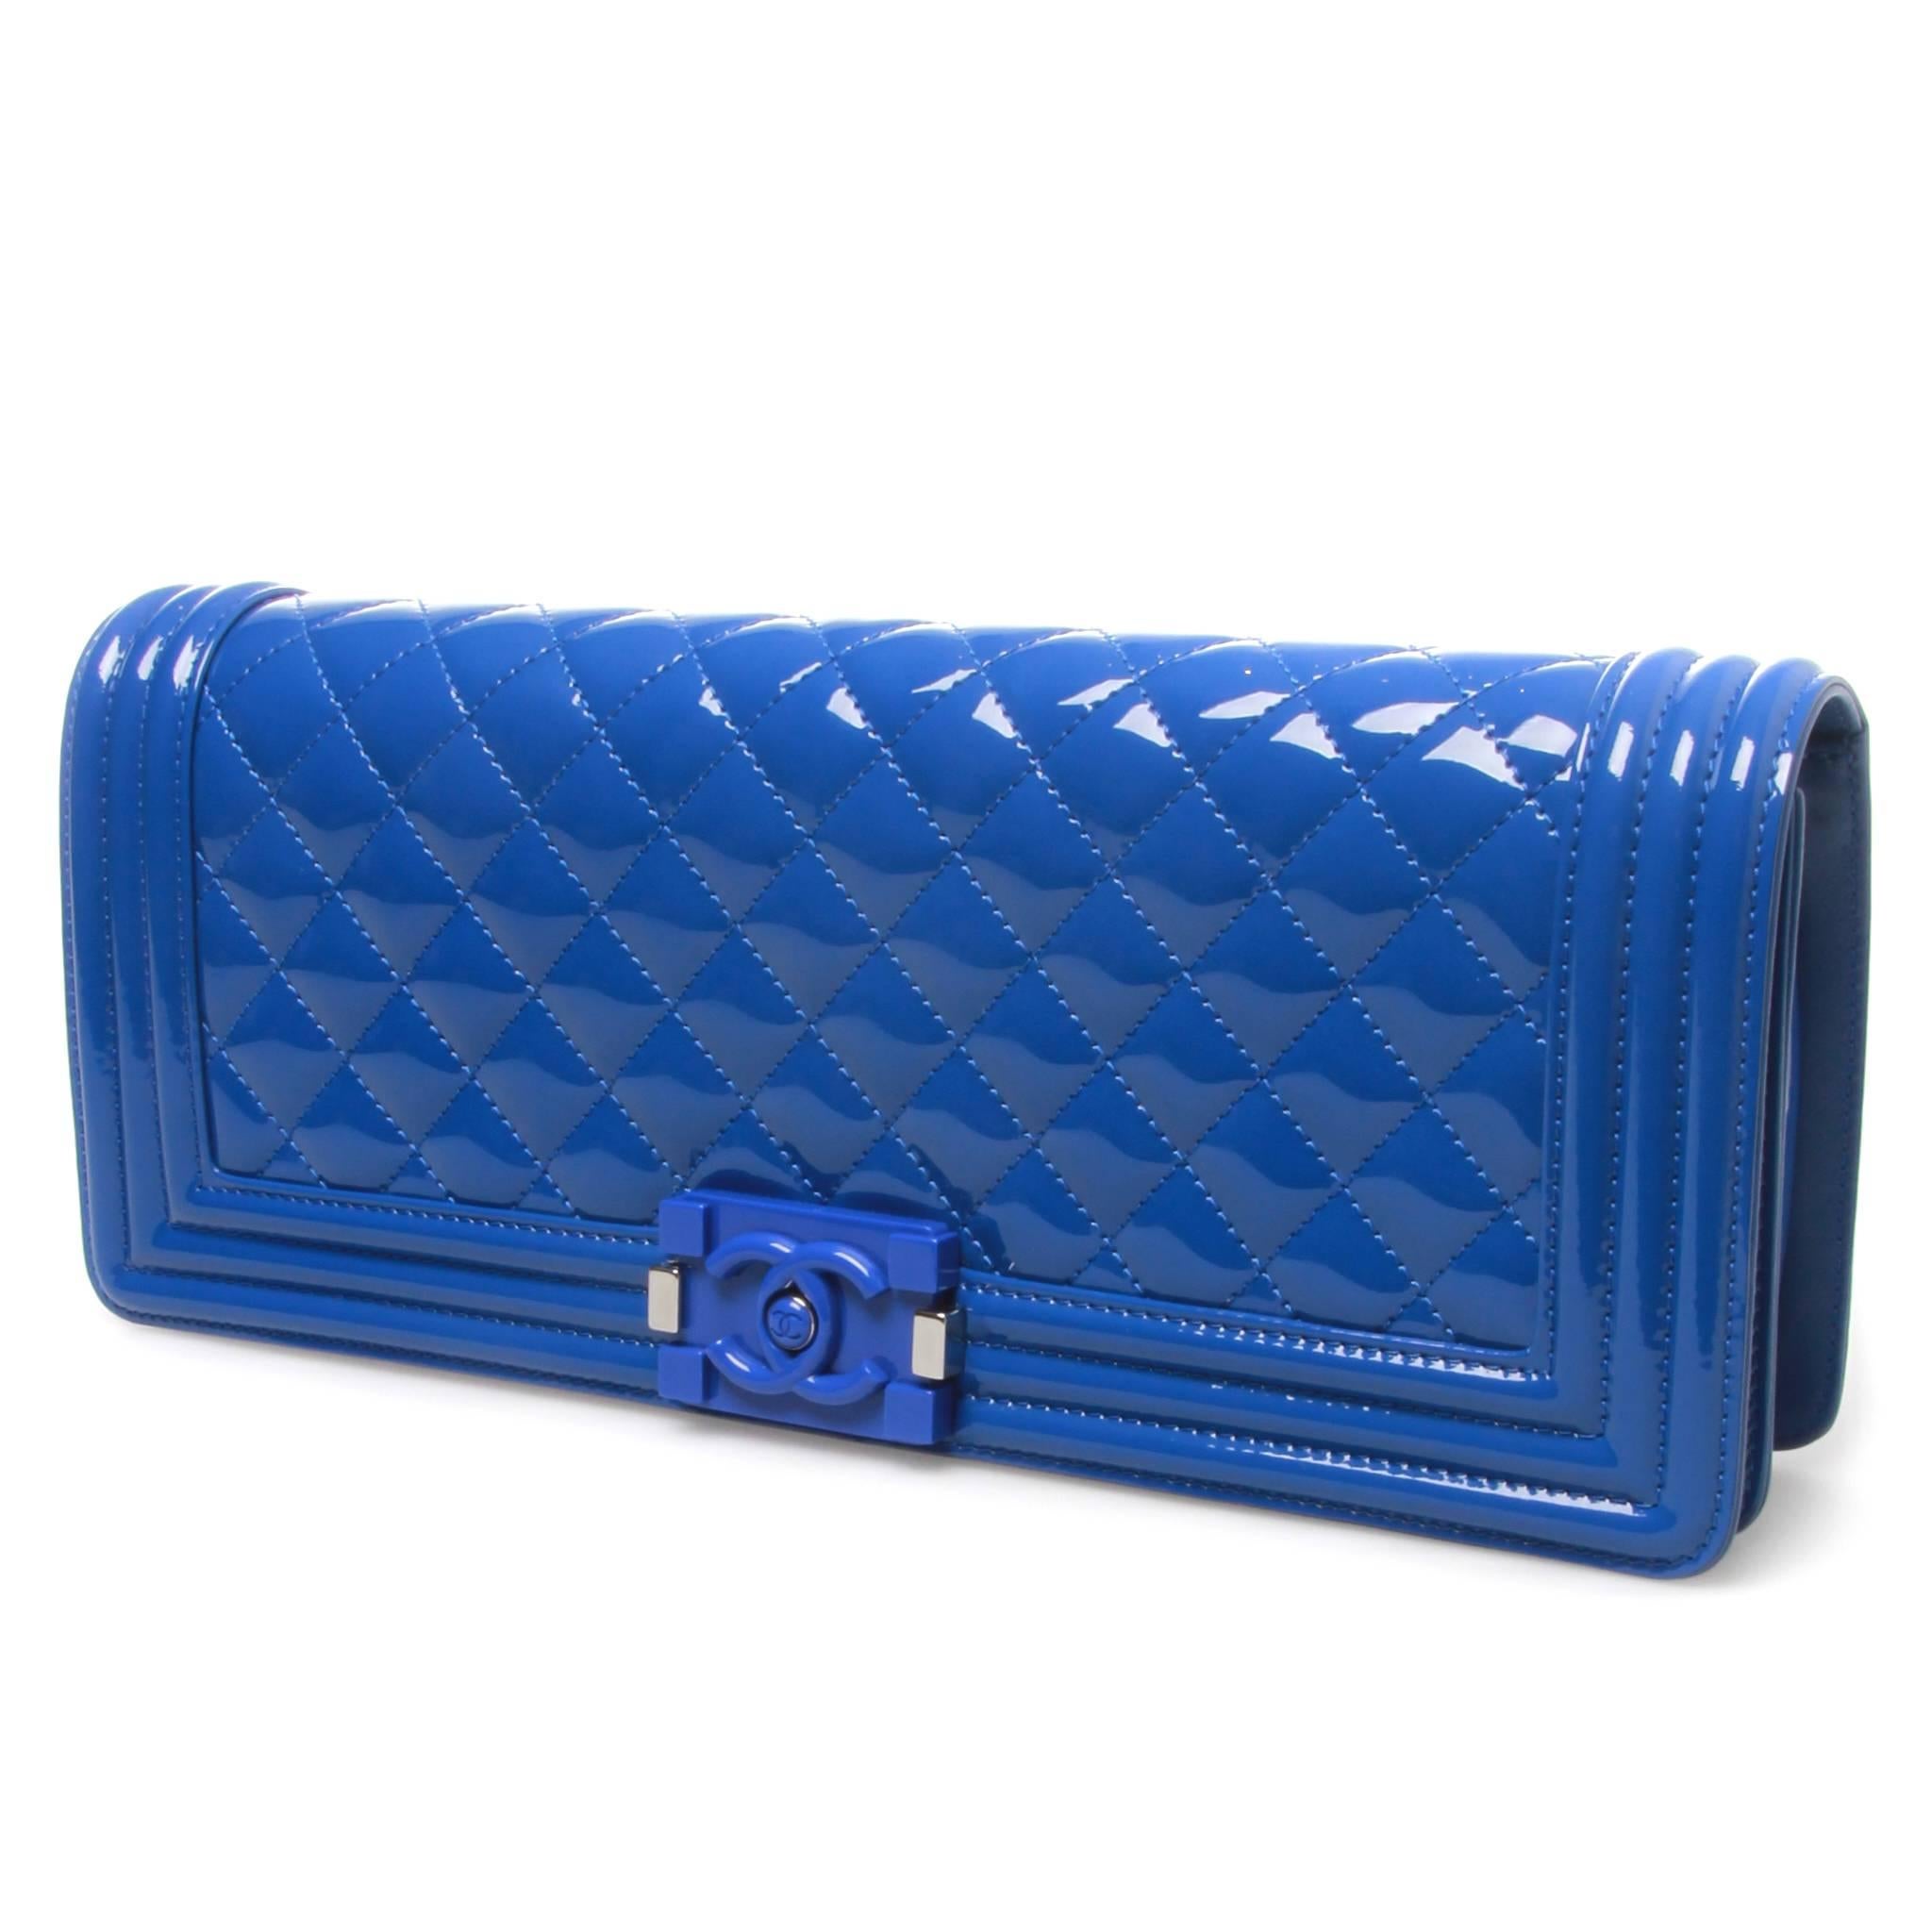 A marvellous Chanel Patent Leather SHW Boy Clutch Bag.
It features a large quilted front flap in electric blue with iconic logo press lock closure, a detachable strap and a handheld strap behind.
Interior lined with a fabric lining and an open